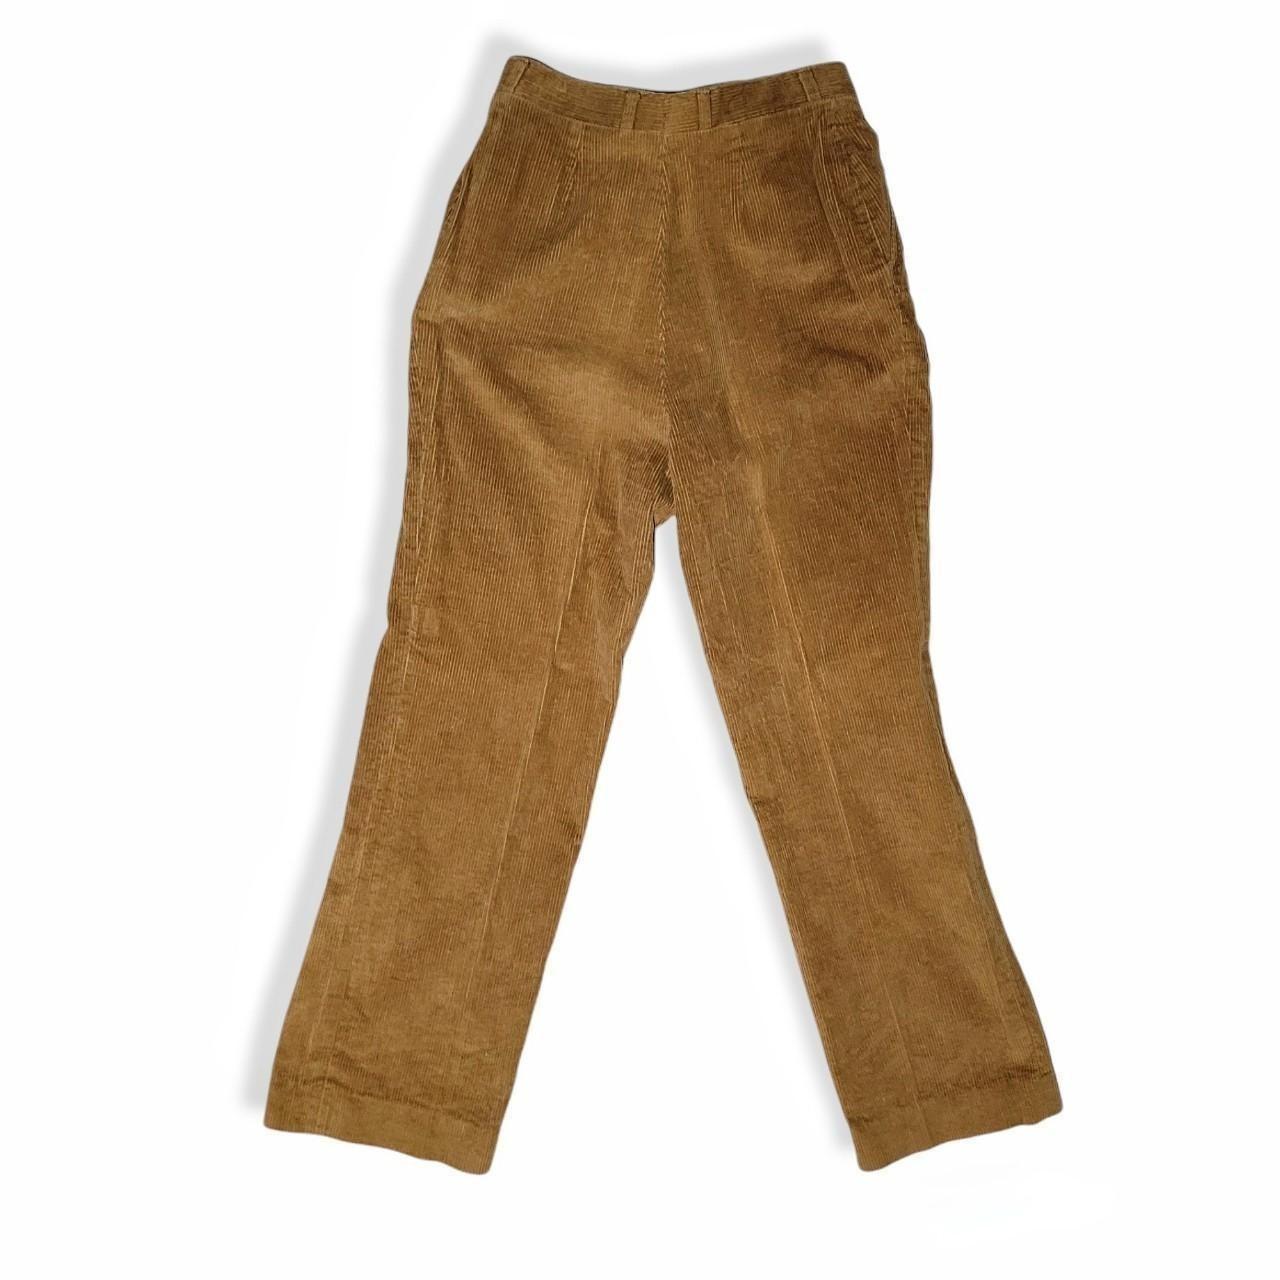 70s Corduroy Pants. These are the cutest vintage - Depop